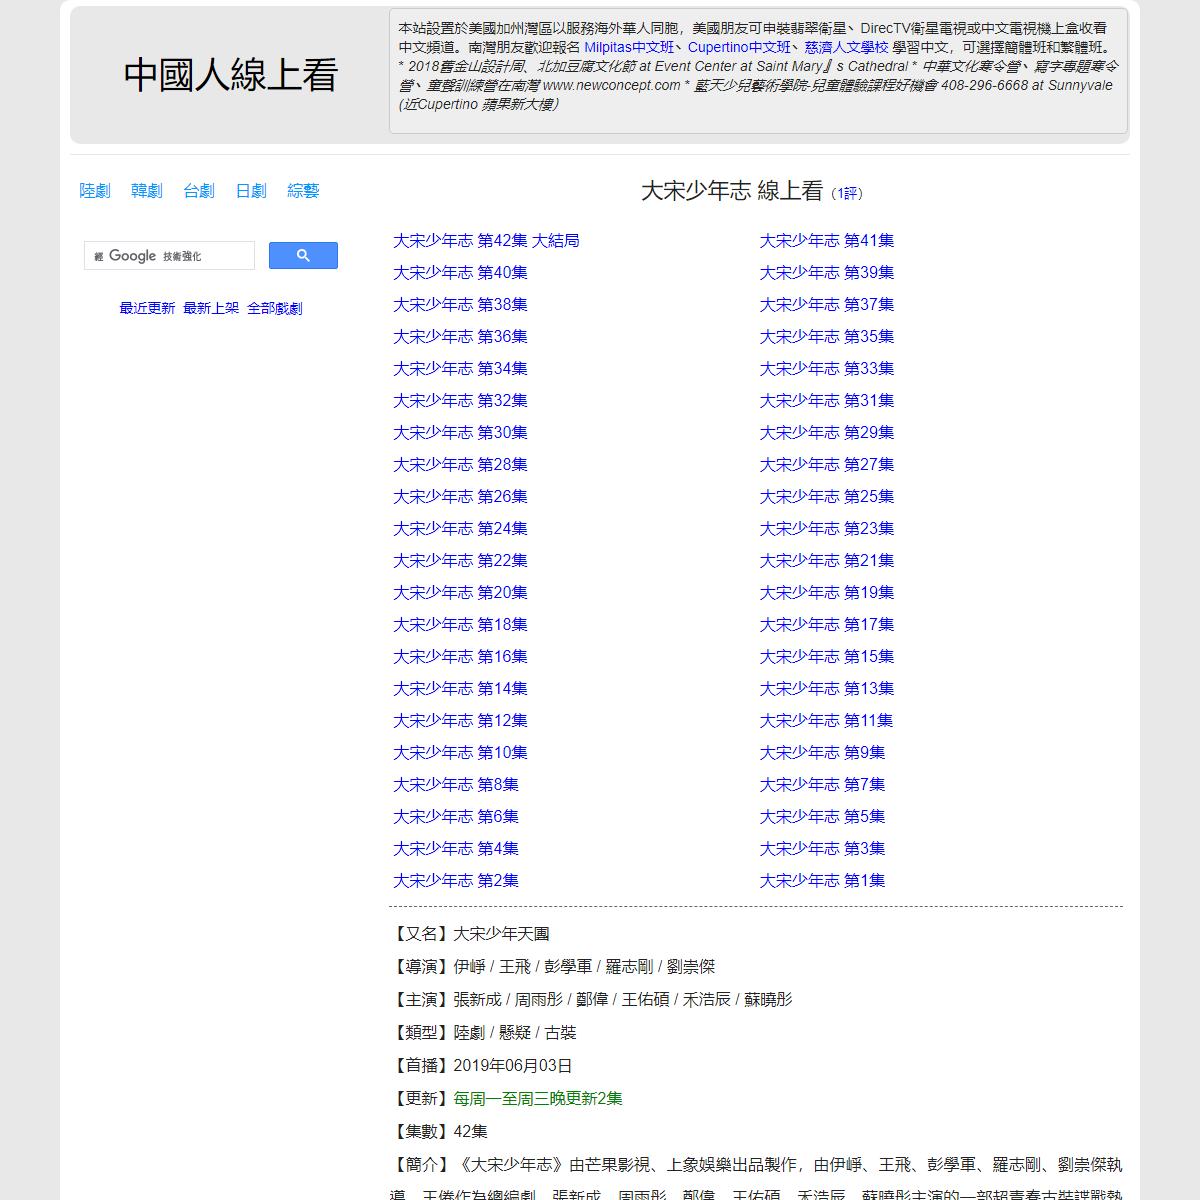 A complete backup of https://chinaq.tv/cn190603/